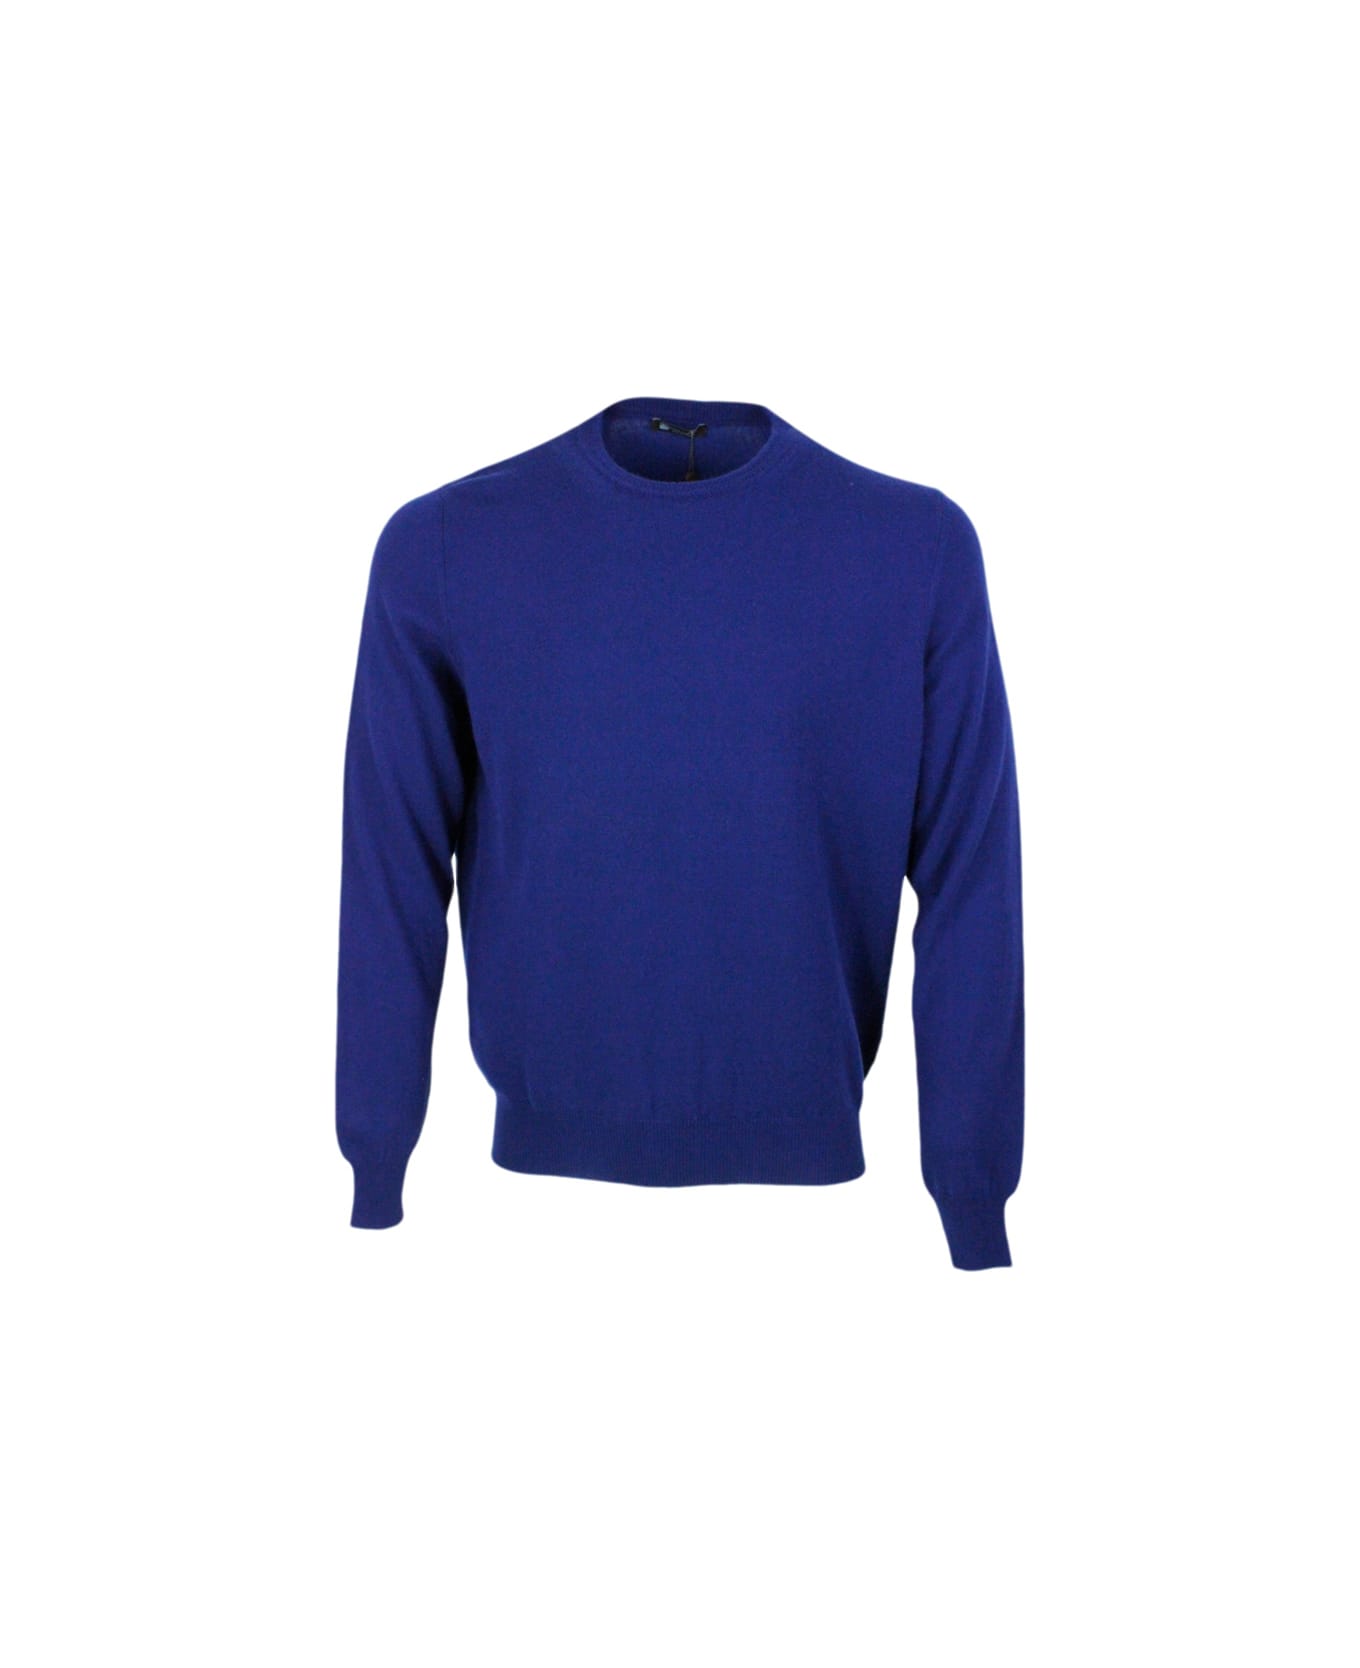 Colombo Long-sleeved Crewneck Sweater In Fine 2-ply 100% Kid Cashmere With Special Processing On The Edge Of The Neck - Blu royal ニットウェア